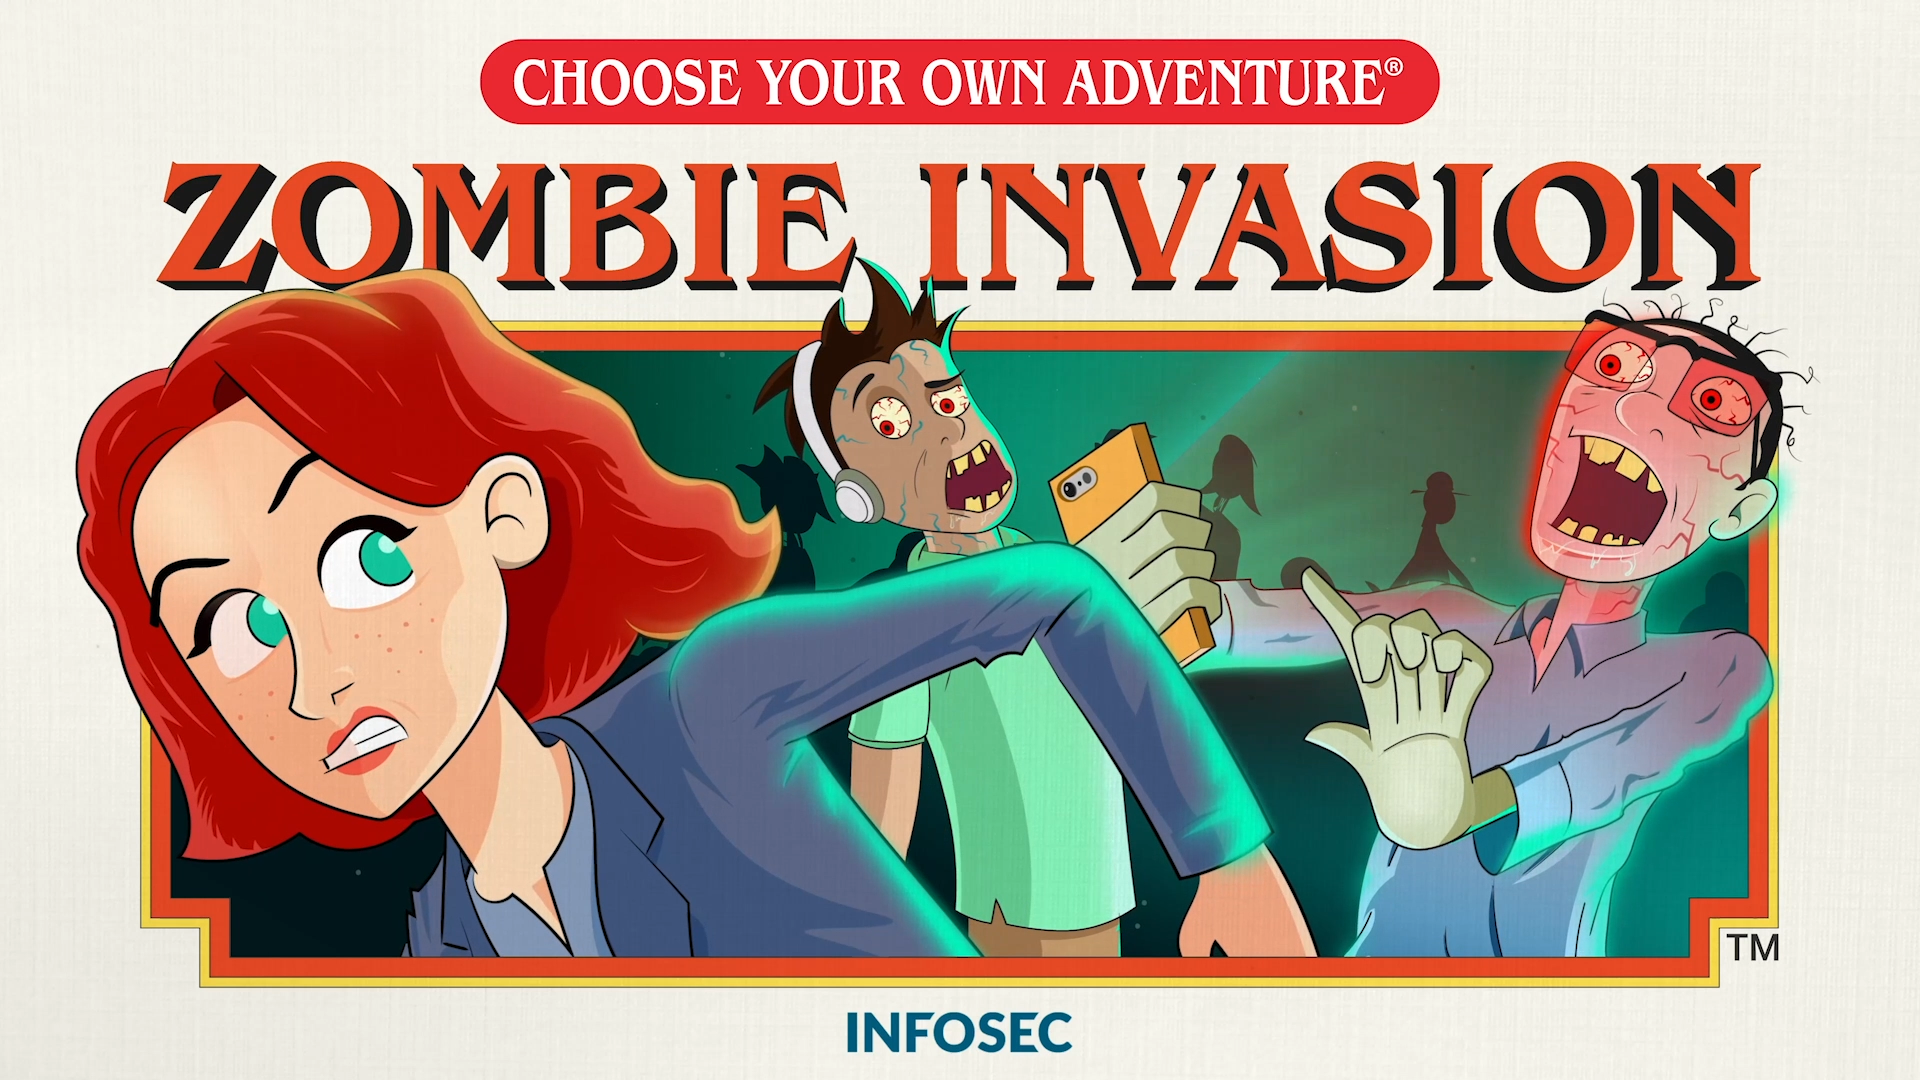 Choose Your Own Adventure: Zombie Invasion